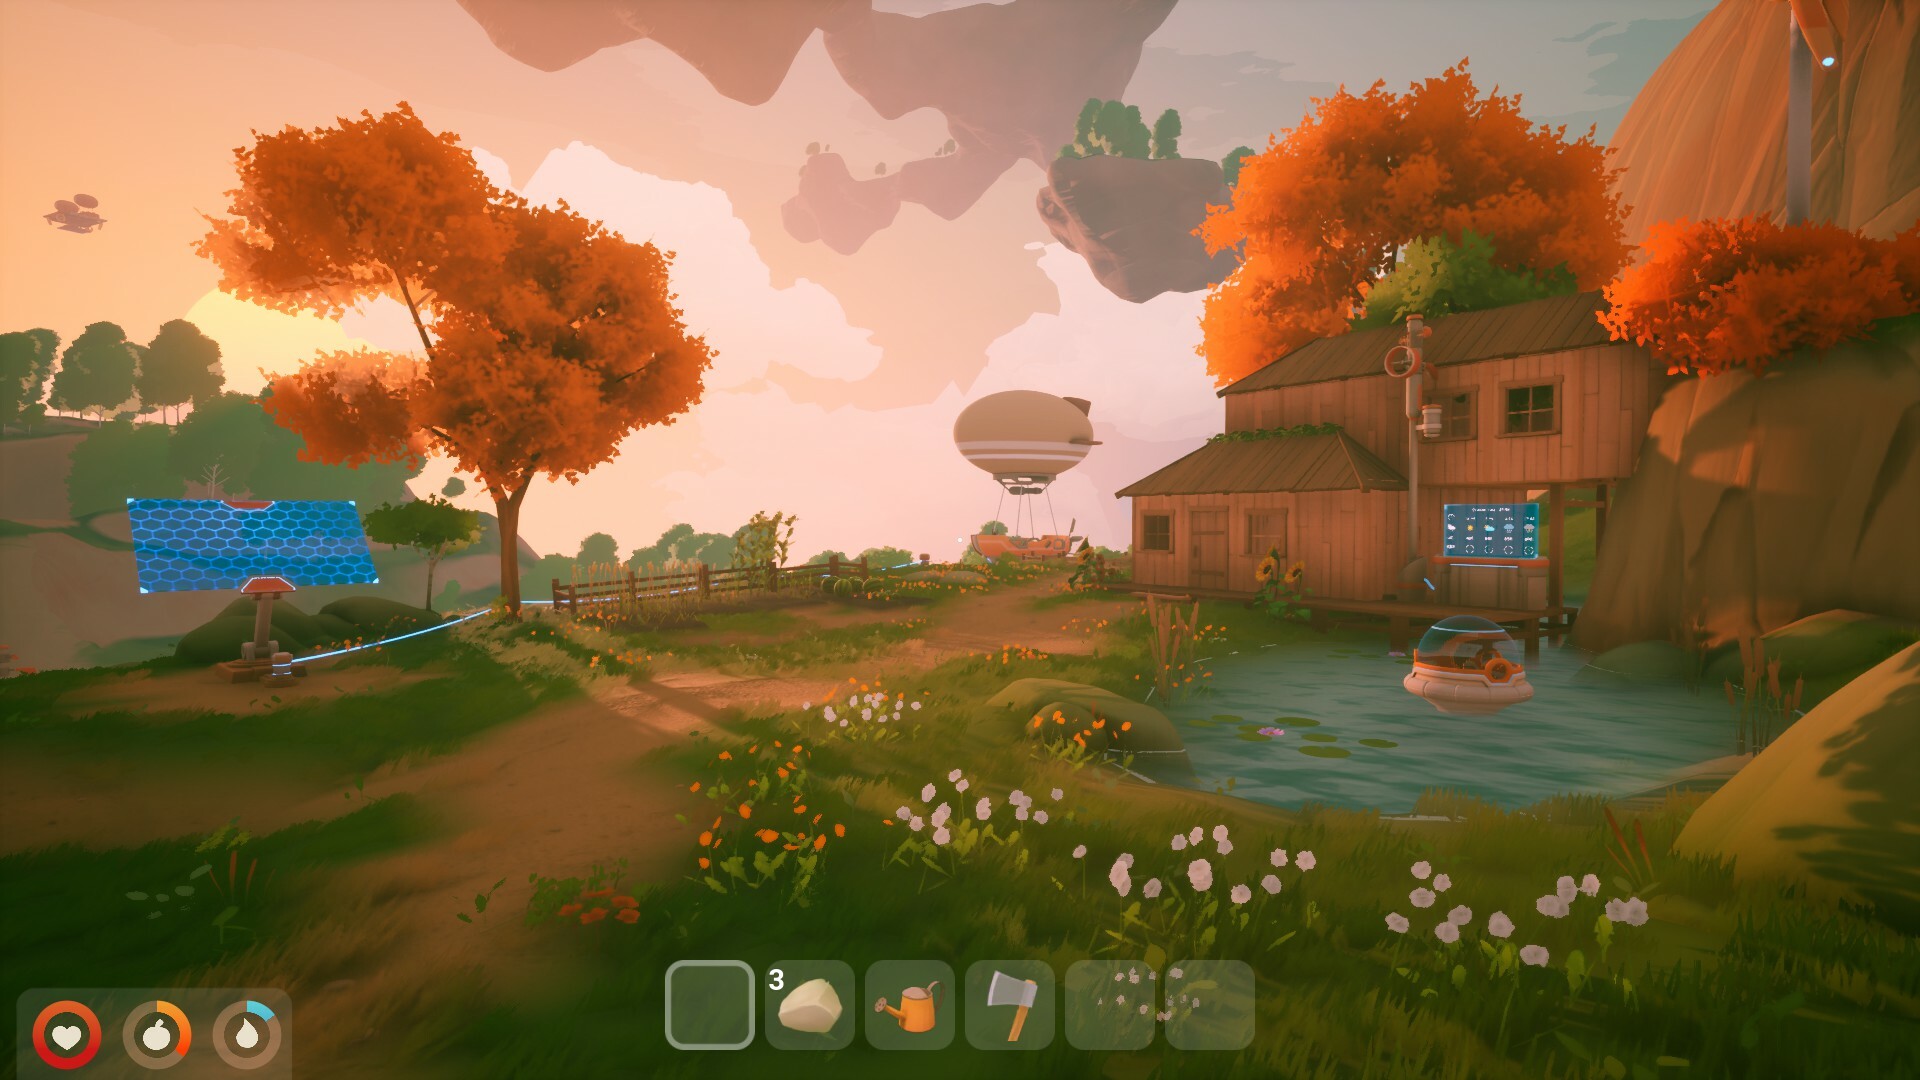 Solarpunk is a co-op 'cozy survival game' set in a world of airships and  floating islands